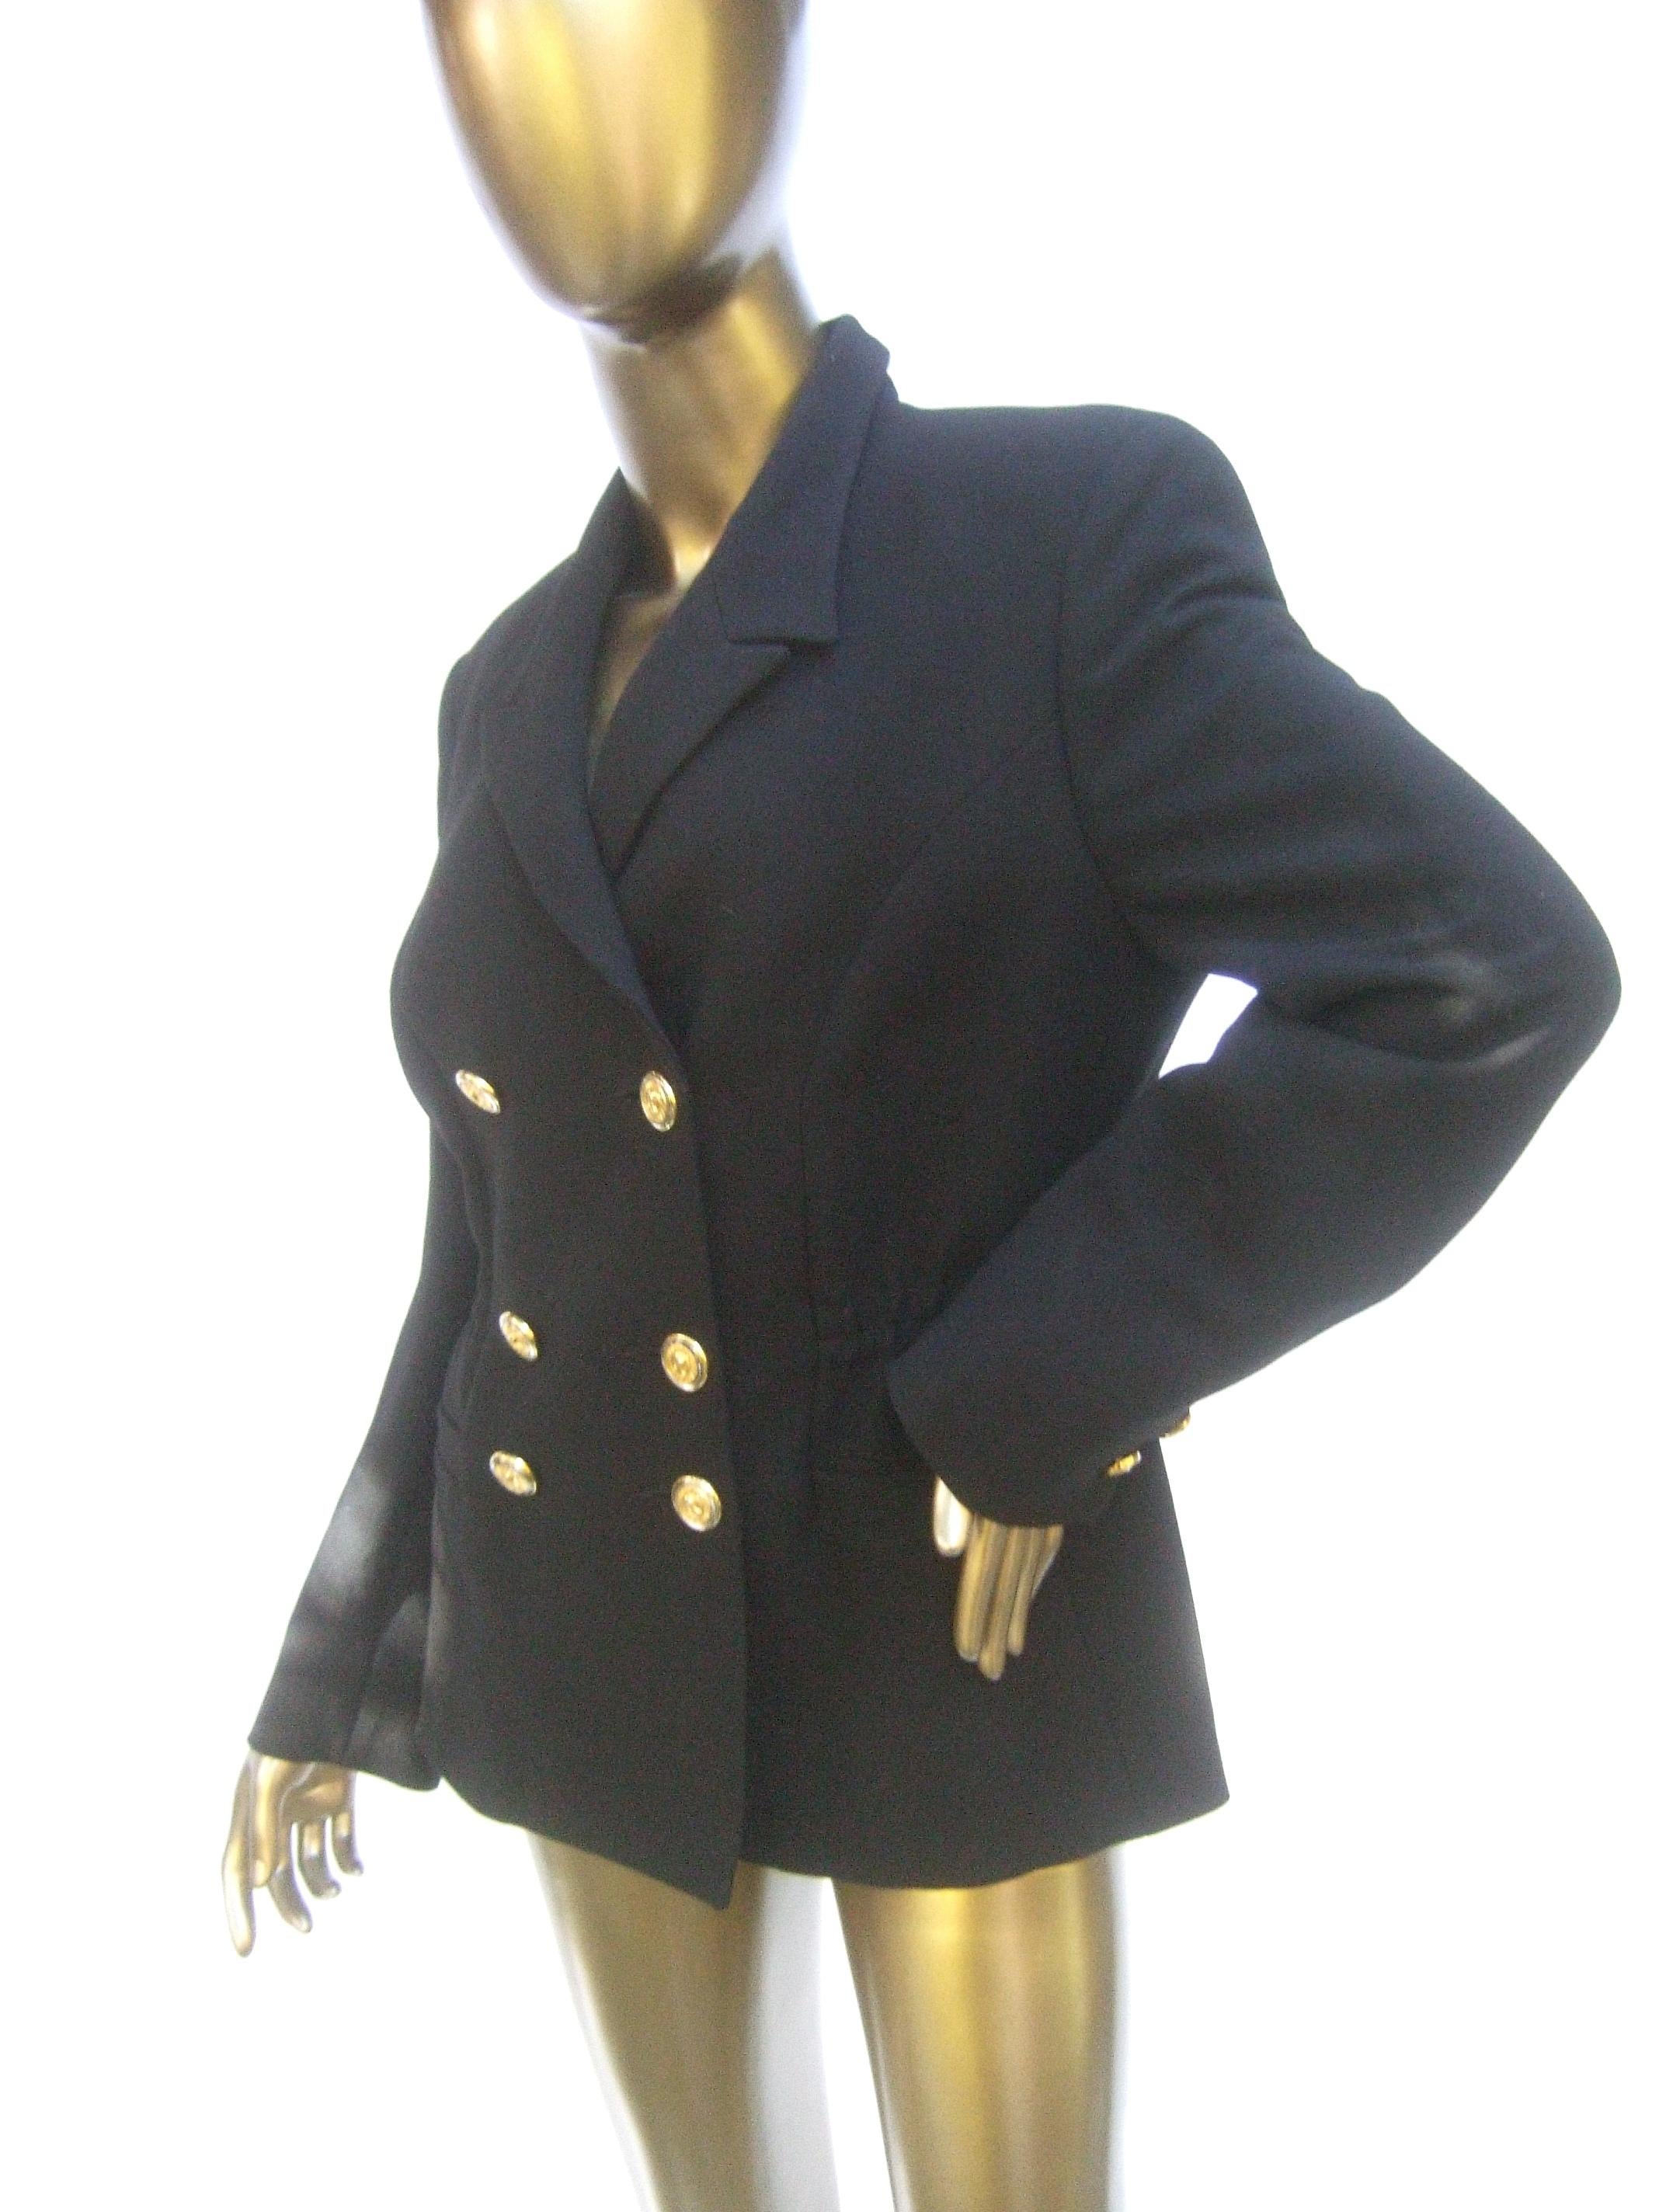 Versace Versus Black Wool Military Style Jacket Circa 1990s In Good Condition For Sale In University City, MO